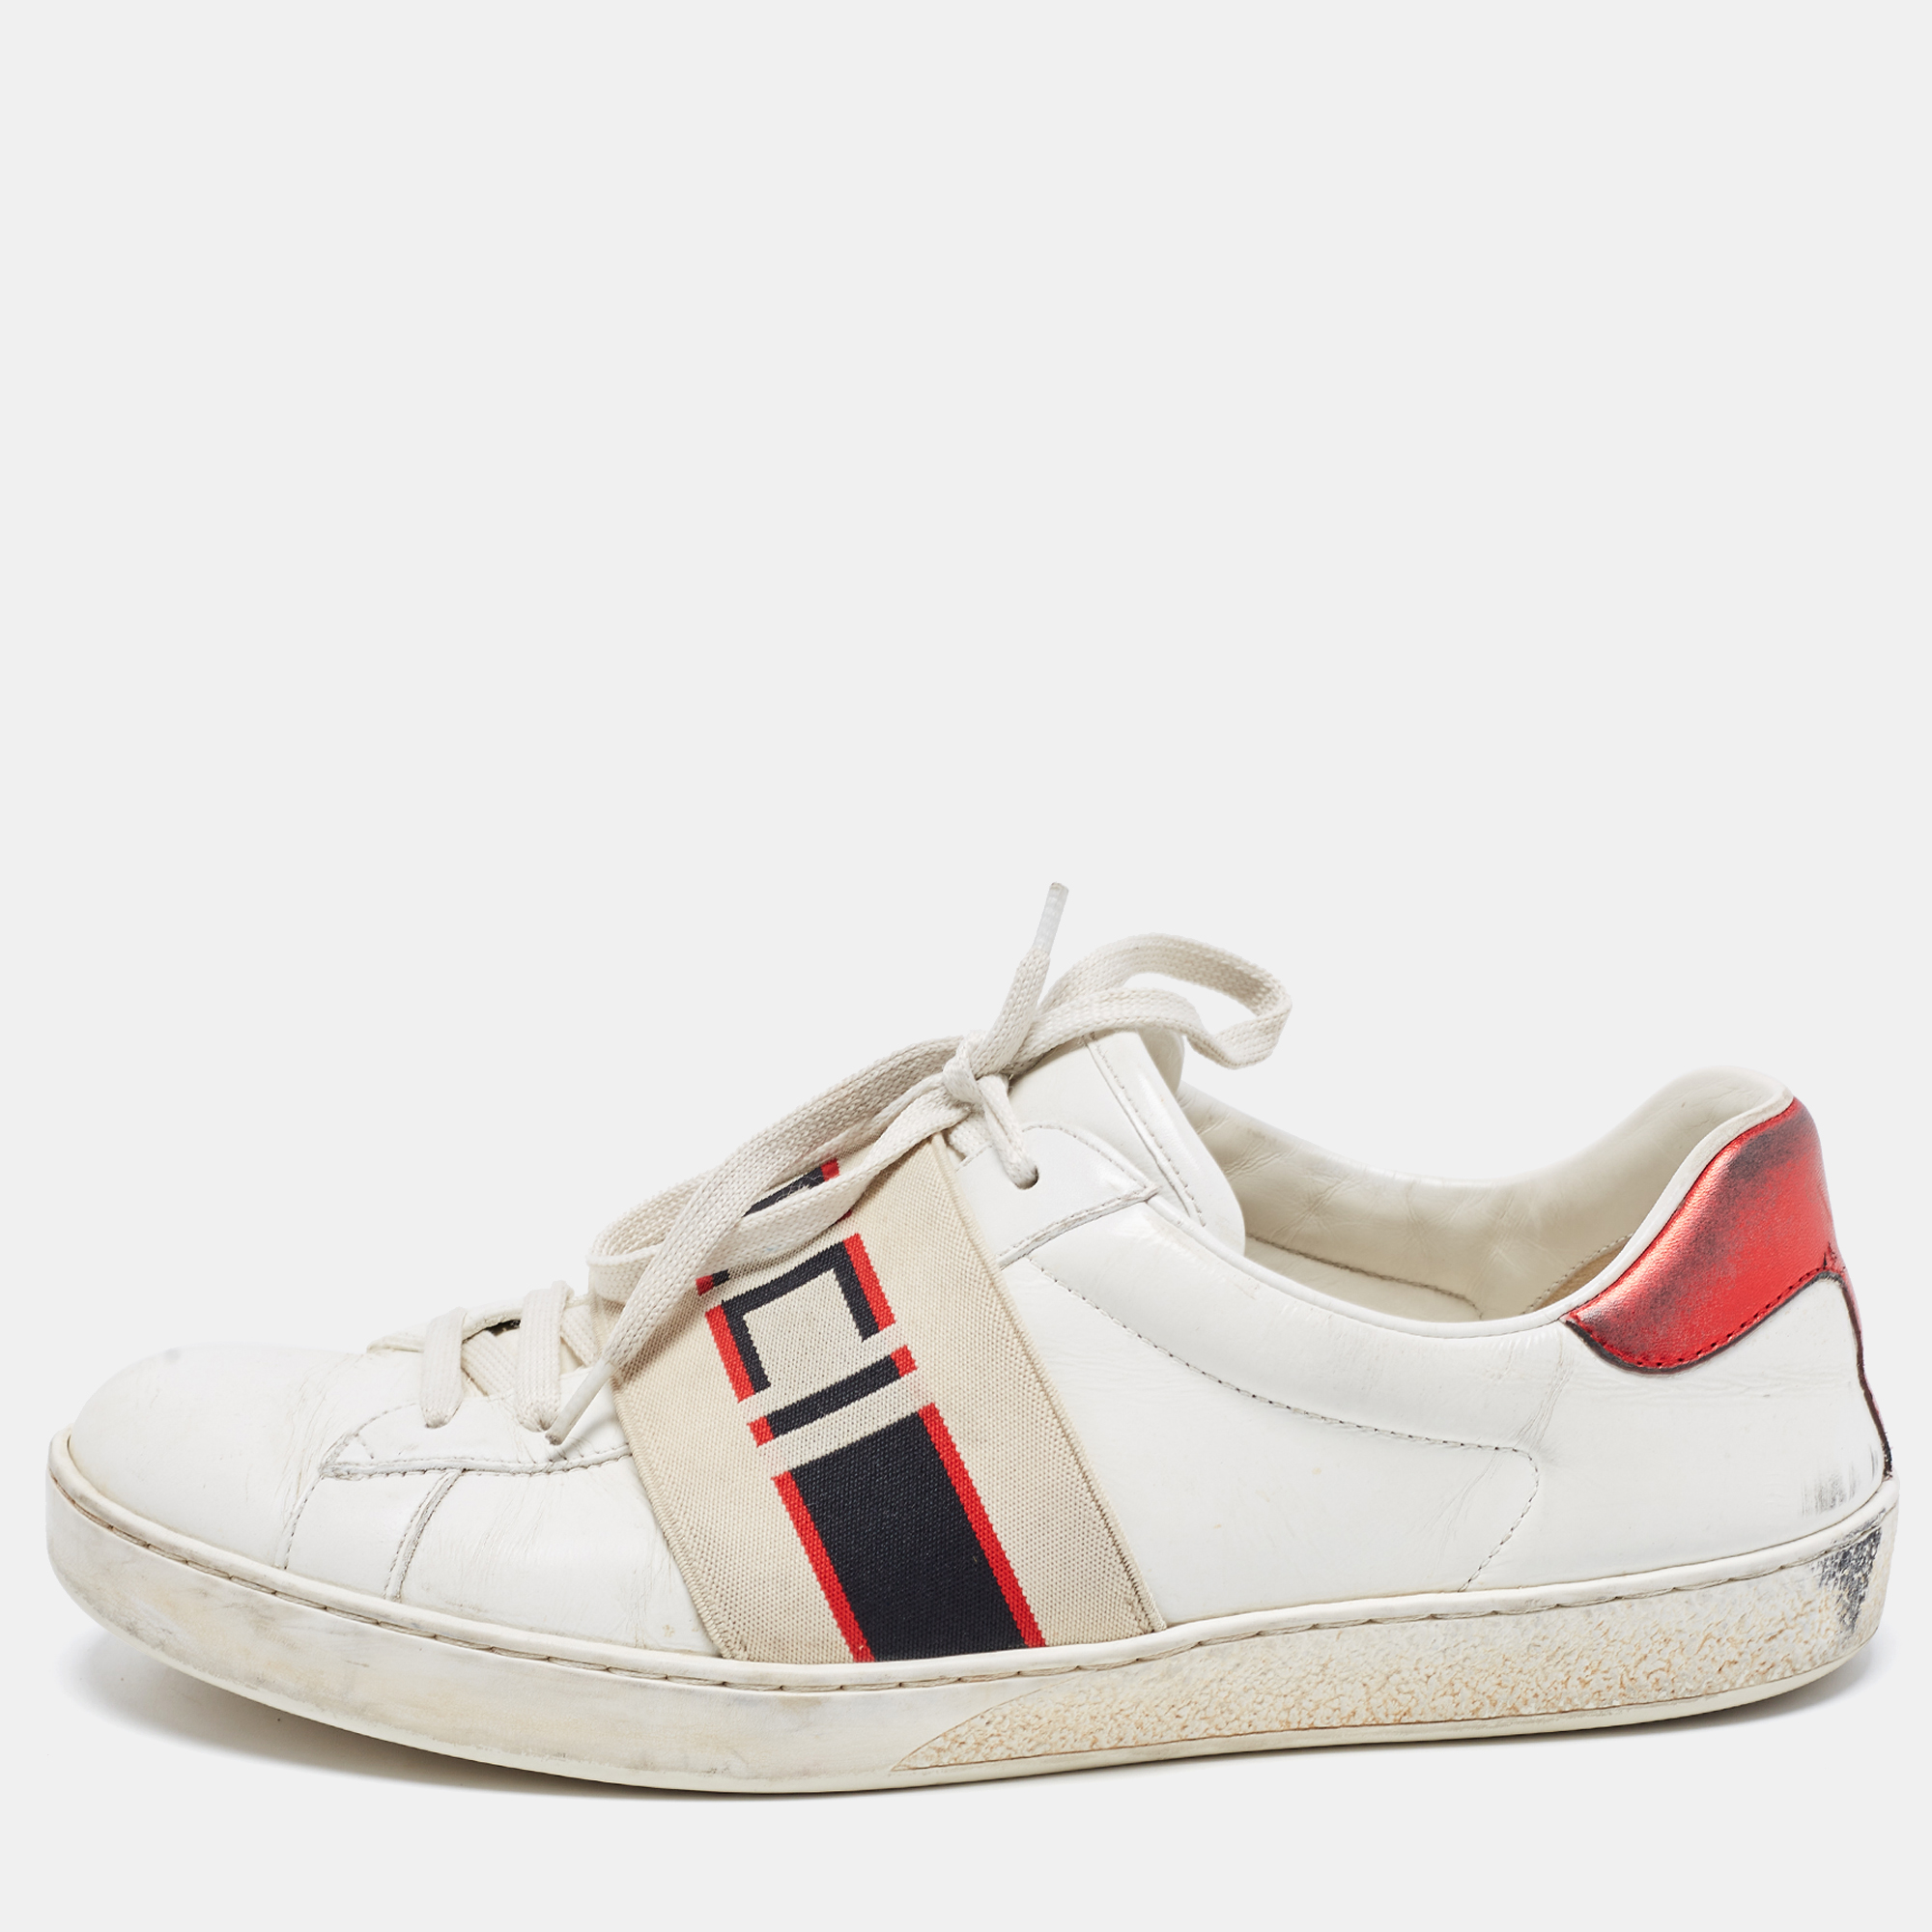 Pre-owned Gucci White Leather Logo Band Ace Trainers Size 41.5